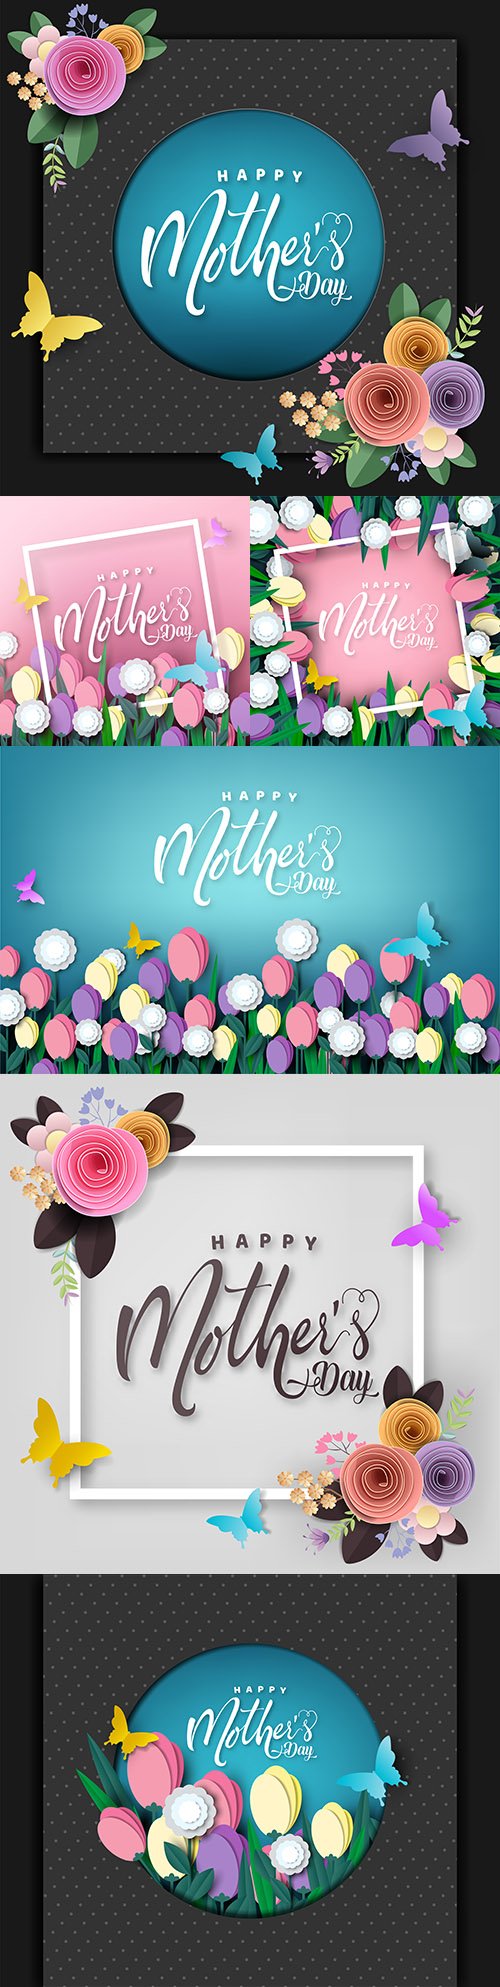 Mother 's day card design butterfly paper flowers